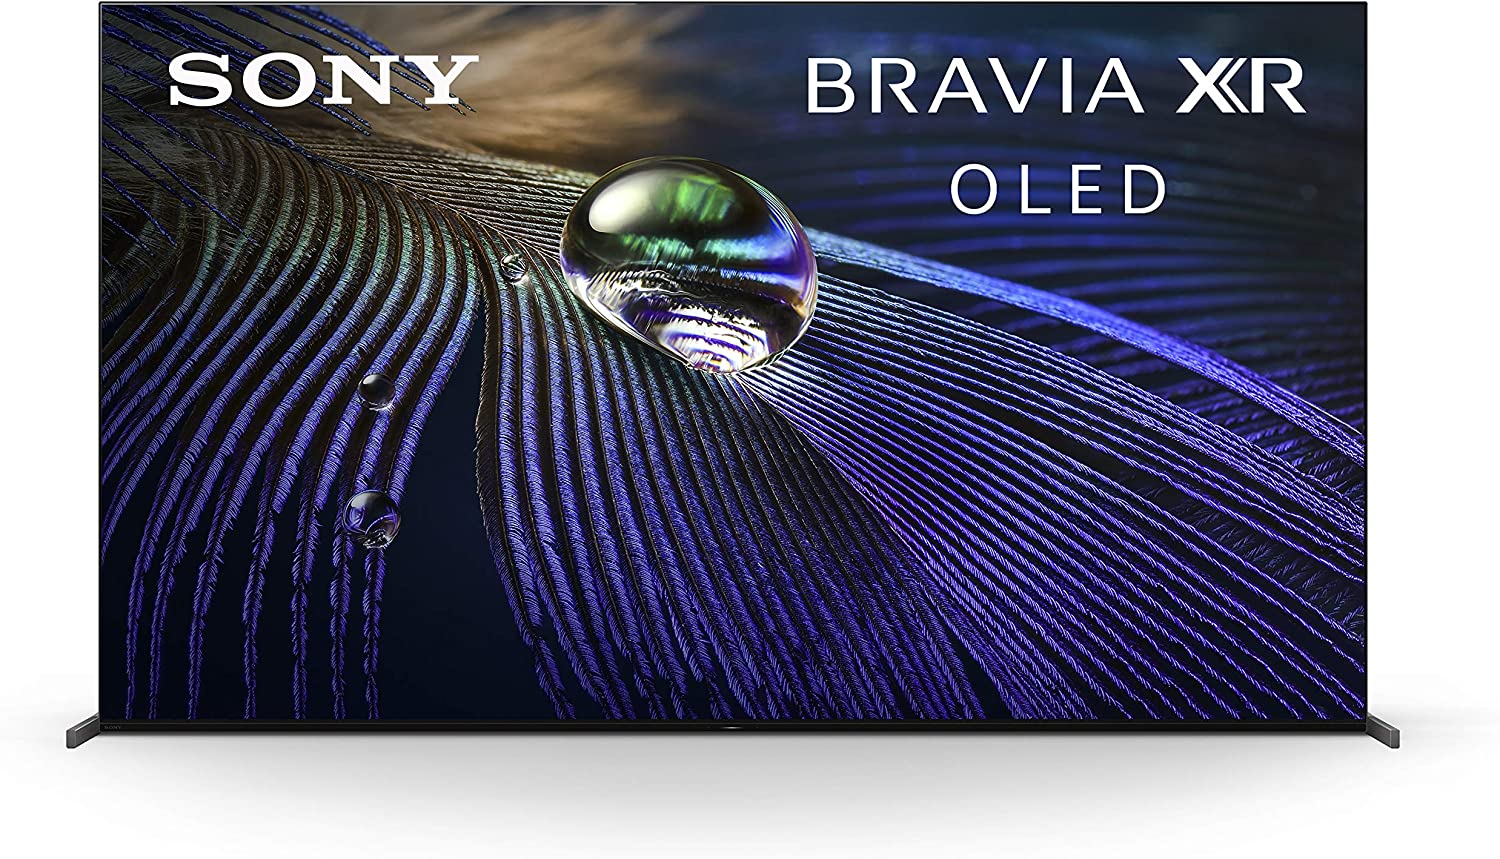 Sony A90J 83 inch BRAVIA XR OLED 4K Ultra HD HDR Smart Google TV with Dolby Vision & Atmos (XR83A90J)